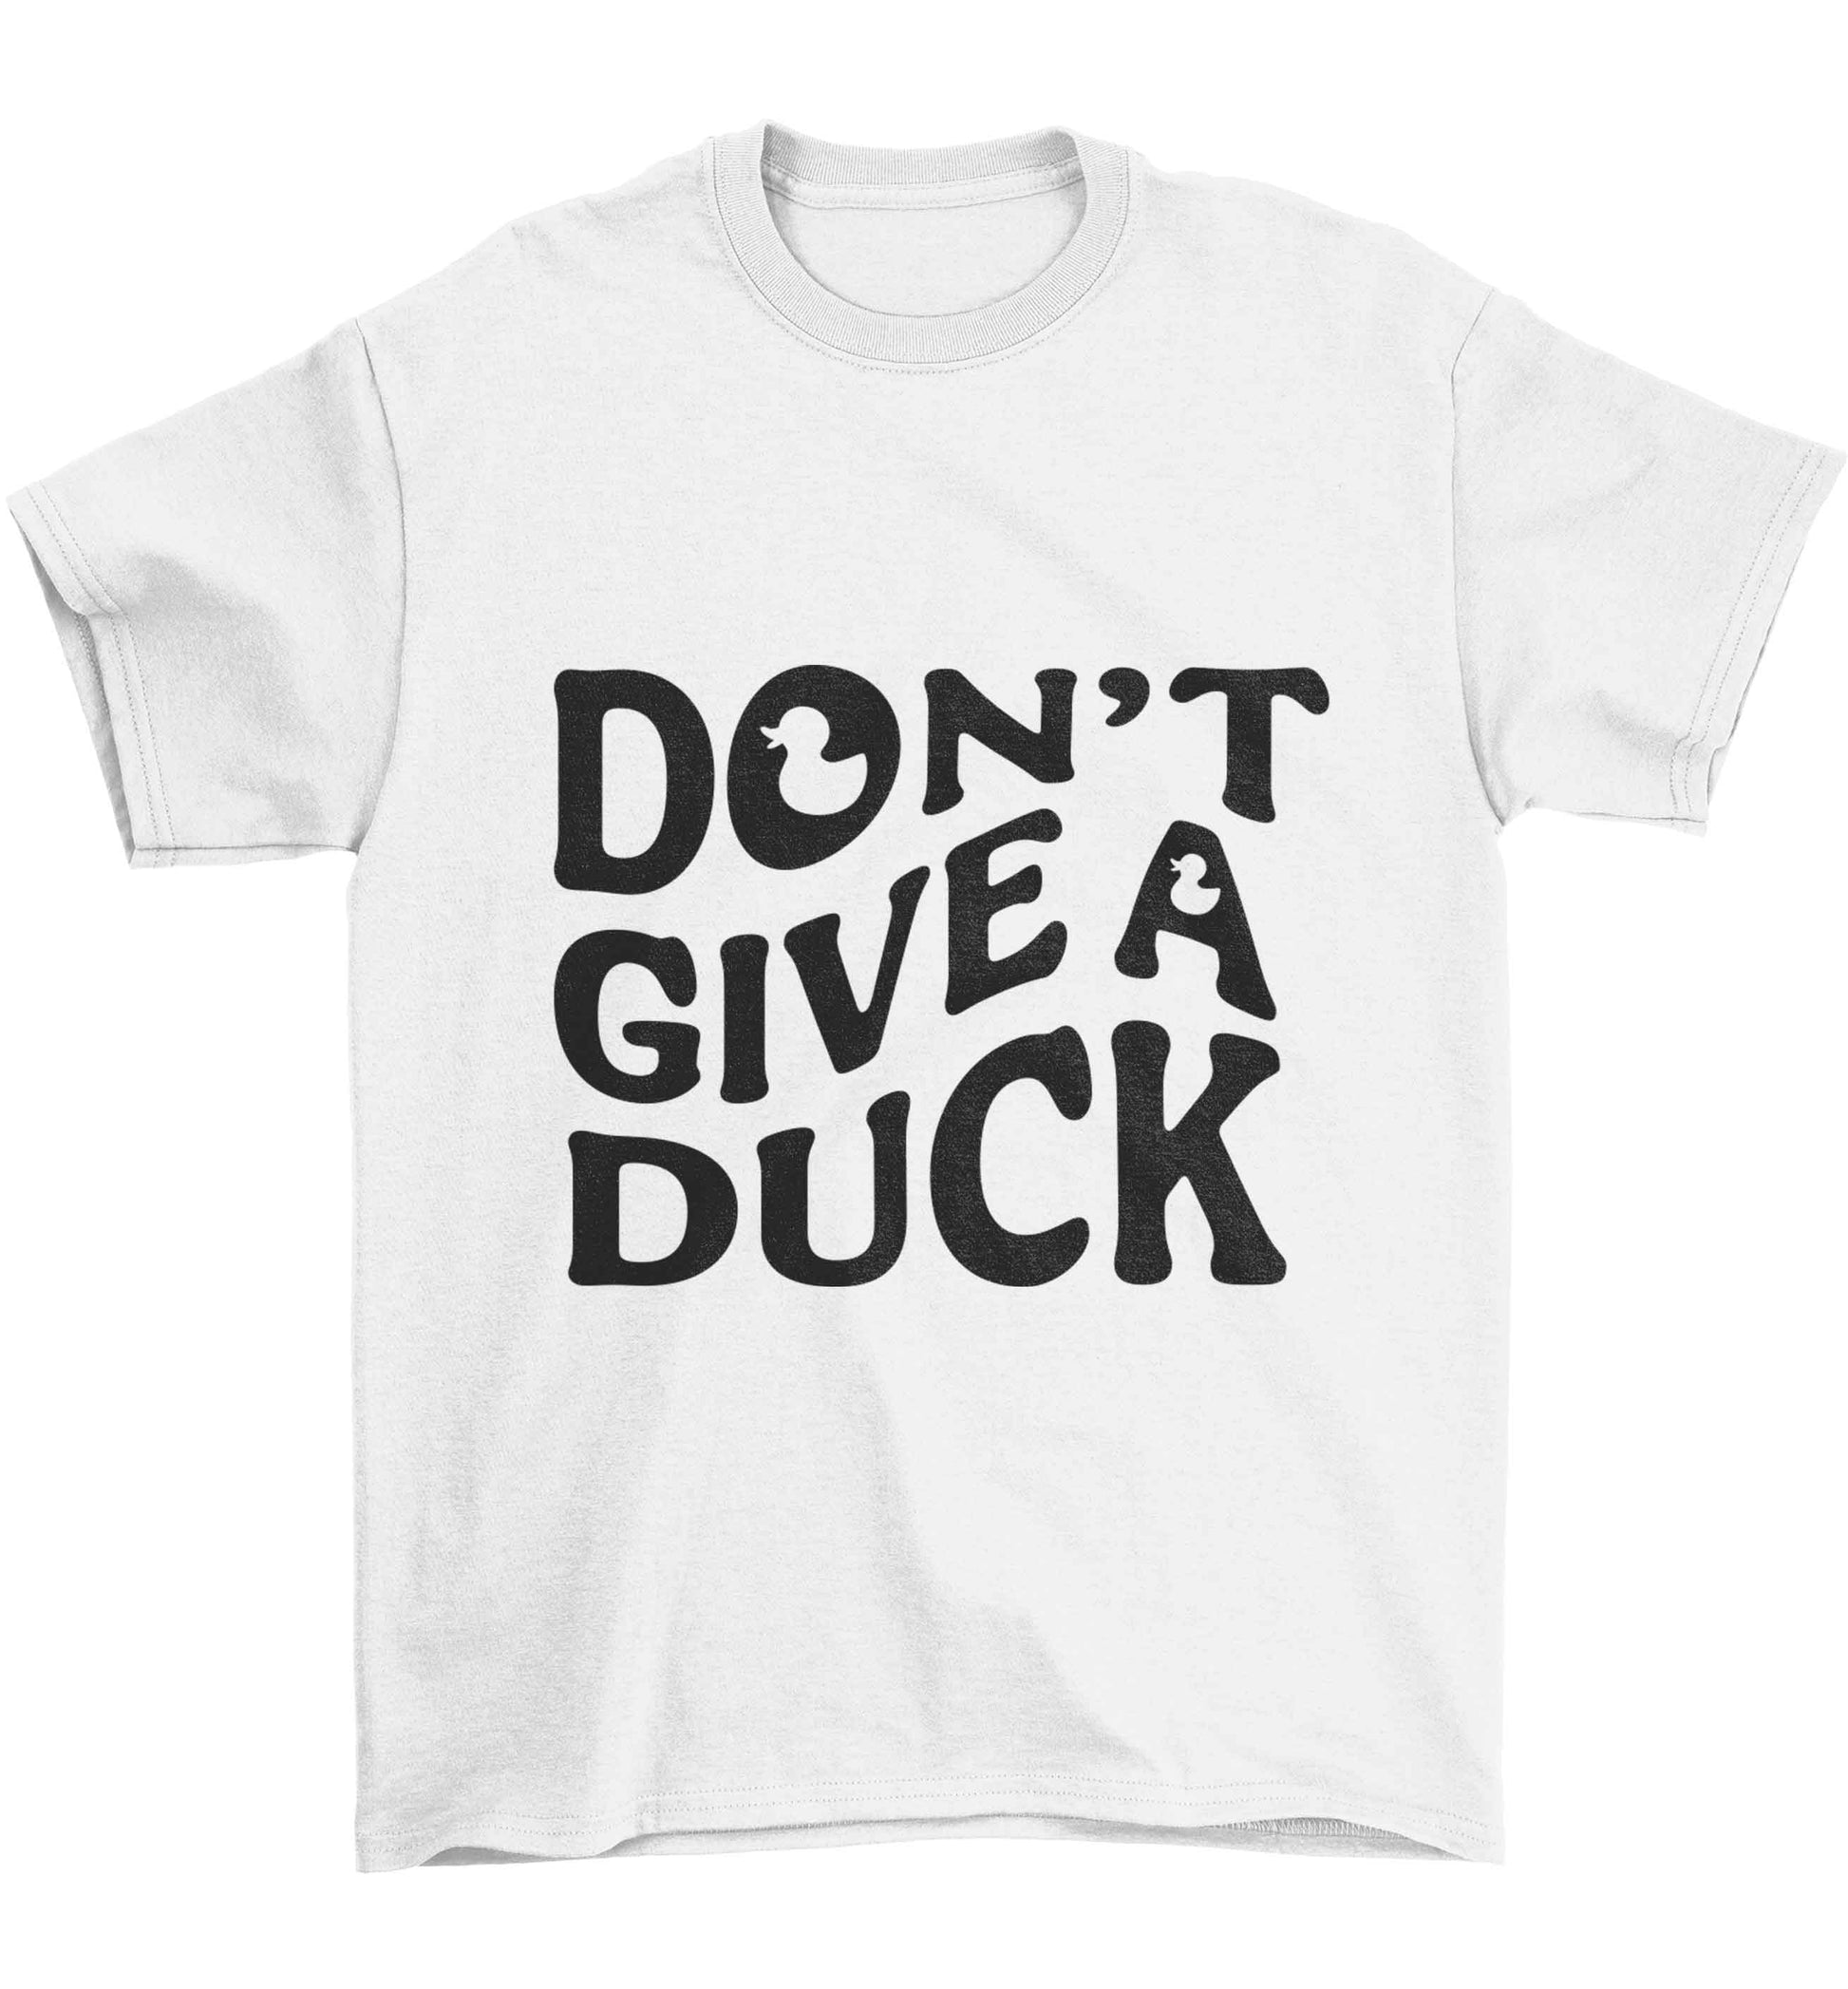 Don't give a duck Children's white Tshirt 12-13 Years